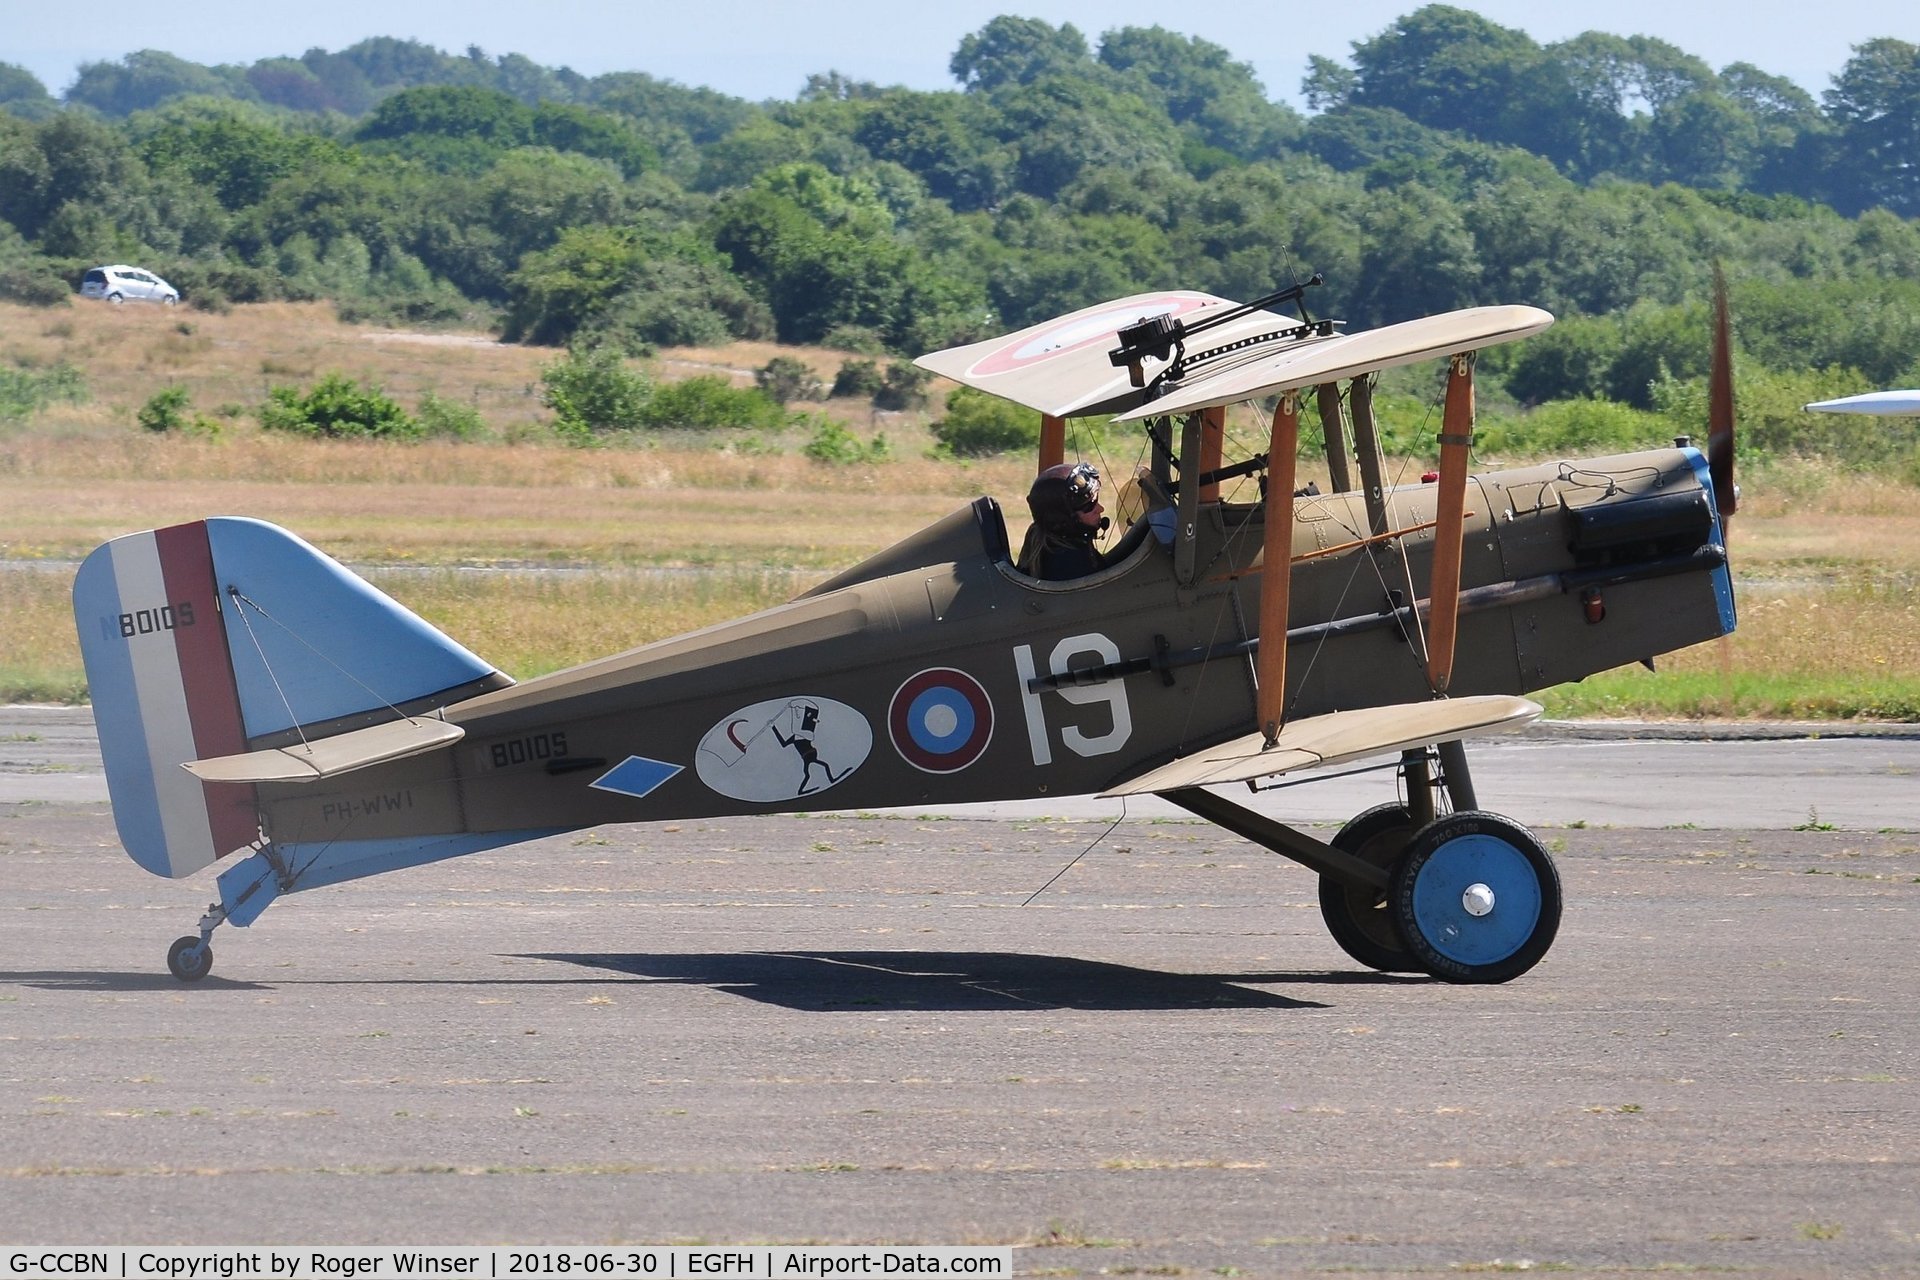 G-CCBN, 1982 Royal Aircraft Factory SE-5A Replica C/N 077246, SE-5A replica in US Army Air Service colour scheme and marked 80105/19.